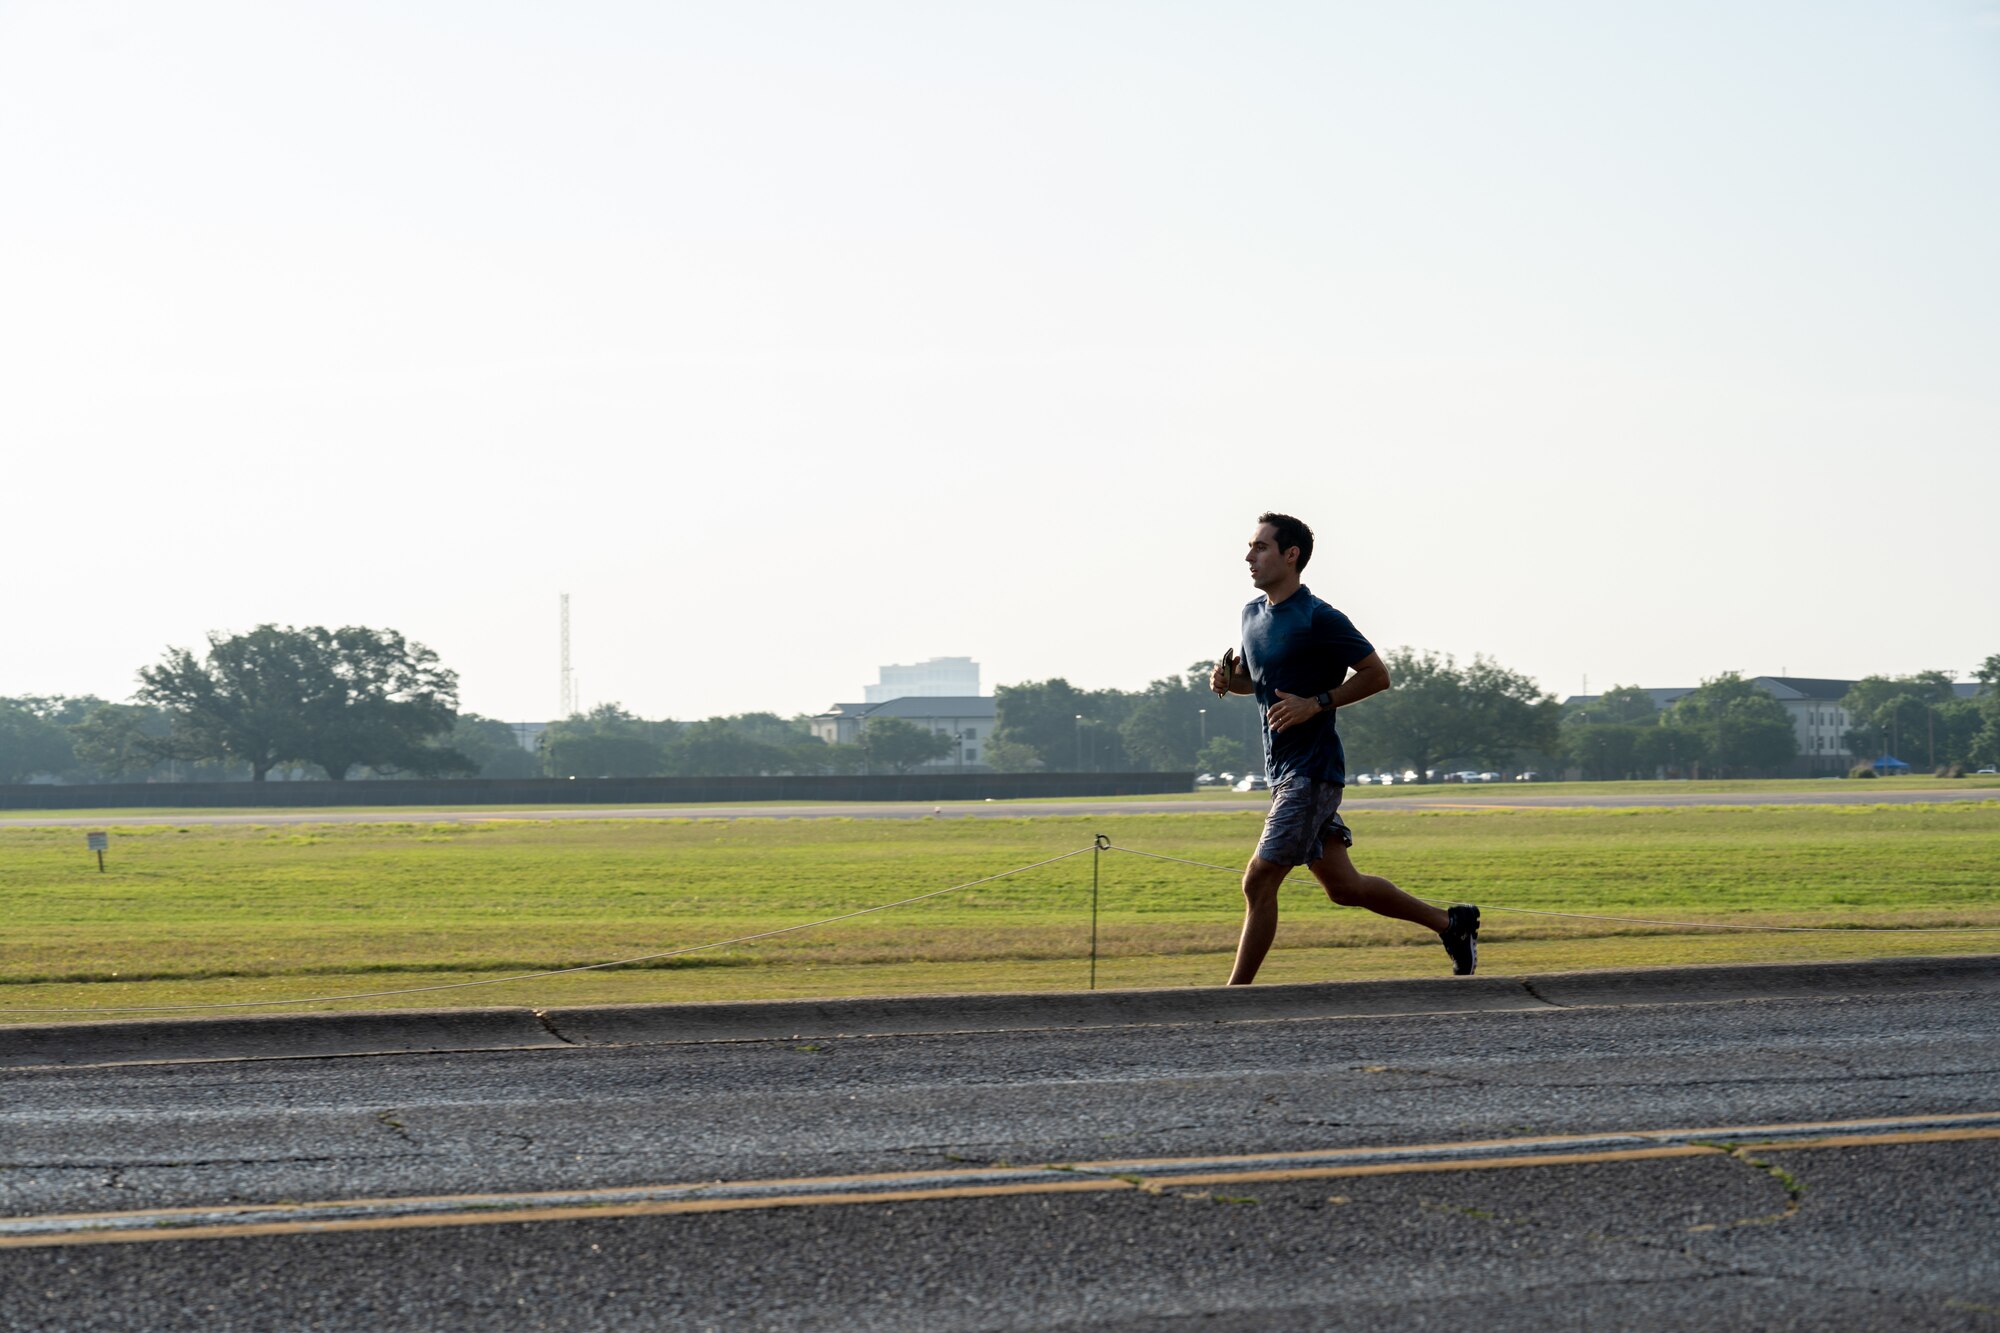 U.S. Air Force Tech. Sgt. Anthony Dibenedetto, 41st Aerial Port Squadron air transportation, participates in the World War II Bataan Death March Memorial 5K run and ruck during Asian American and Pacific Islander Heritage Month at Keesler Air Force Base, Mississippi, May 25, 2023.